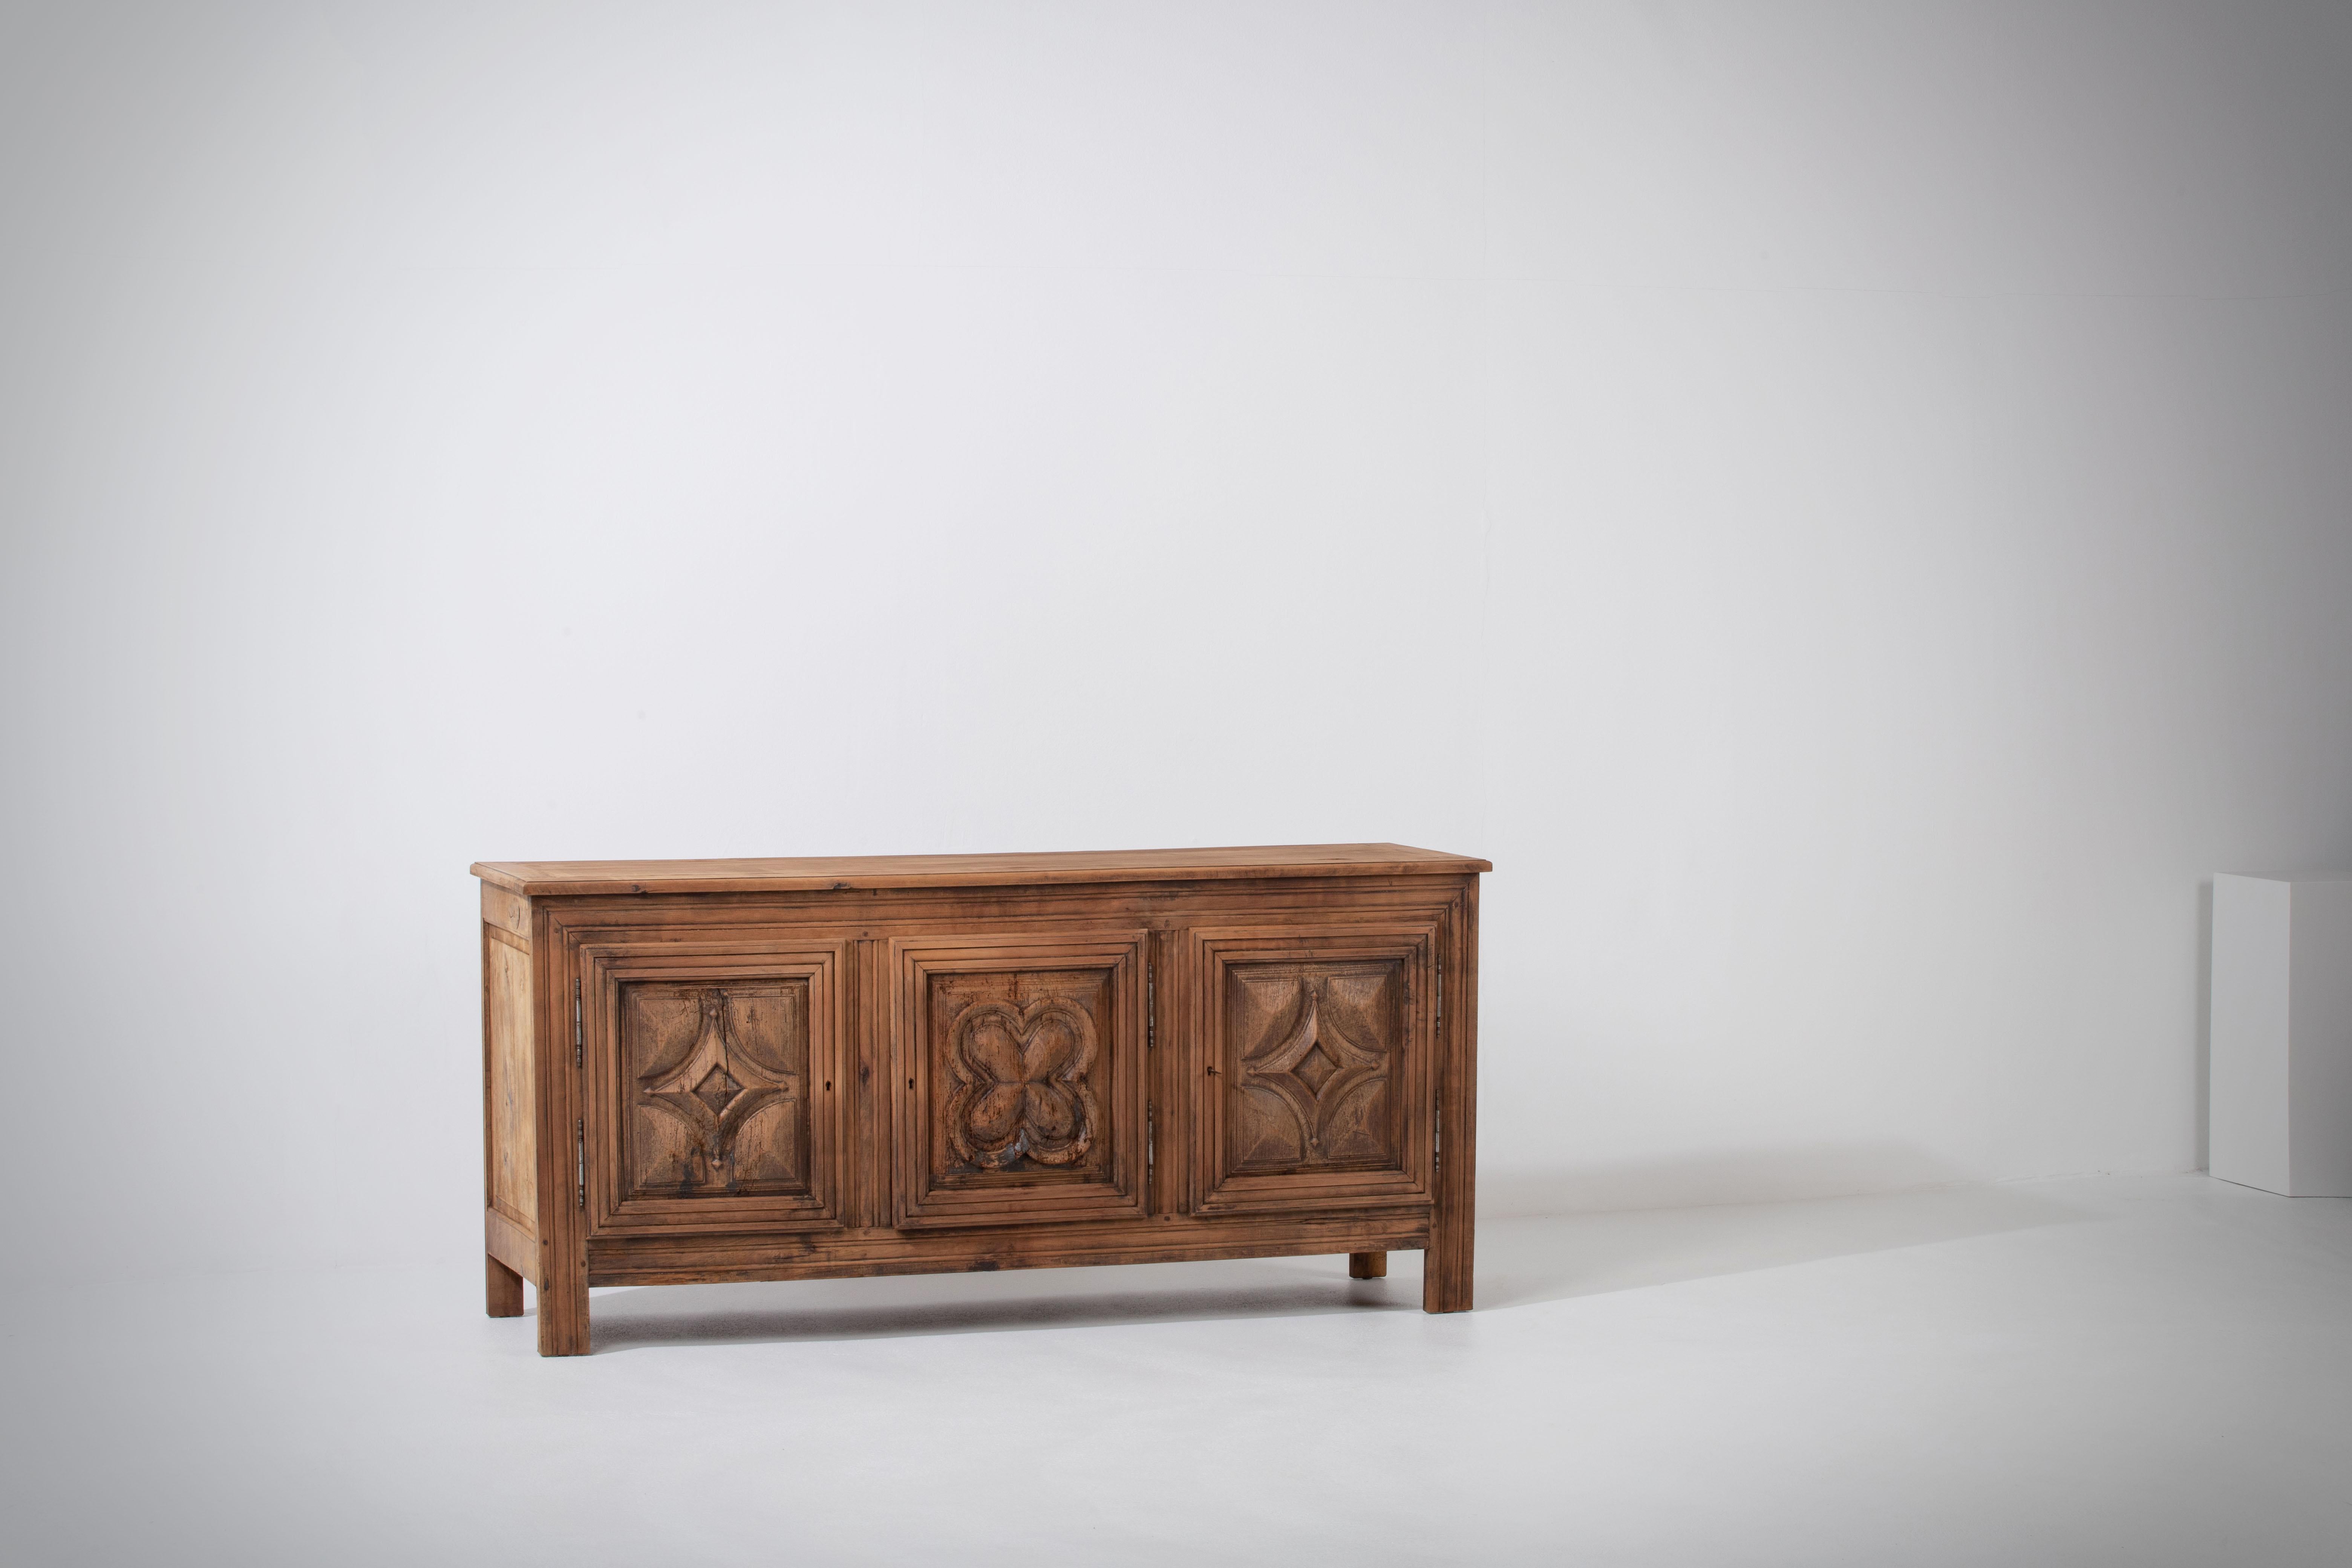 Introducing an exquisite sideboard crafted from mahogany in France during the 1900s. This remarkable piece showcases the timeless beauty and craftsmanship of the era.

In its original condition, this sideboard boasts a beautiful patina that